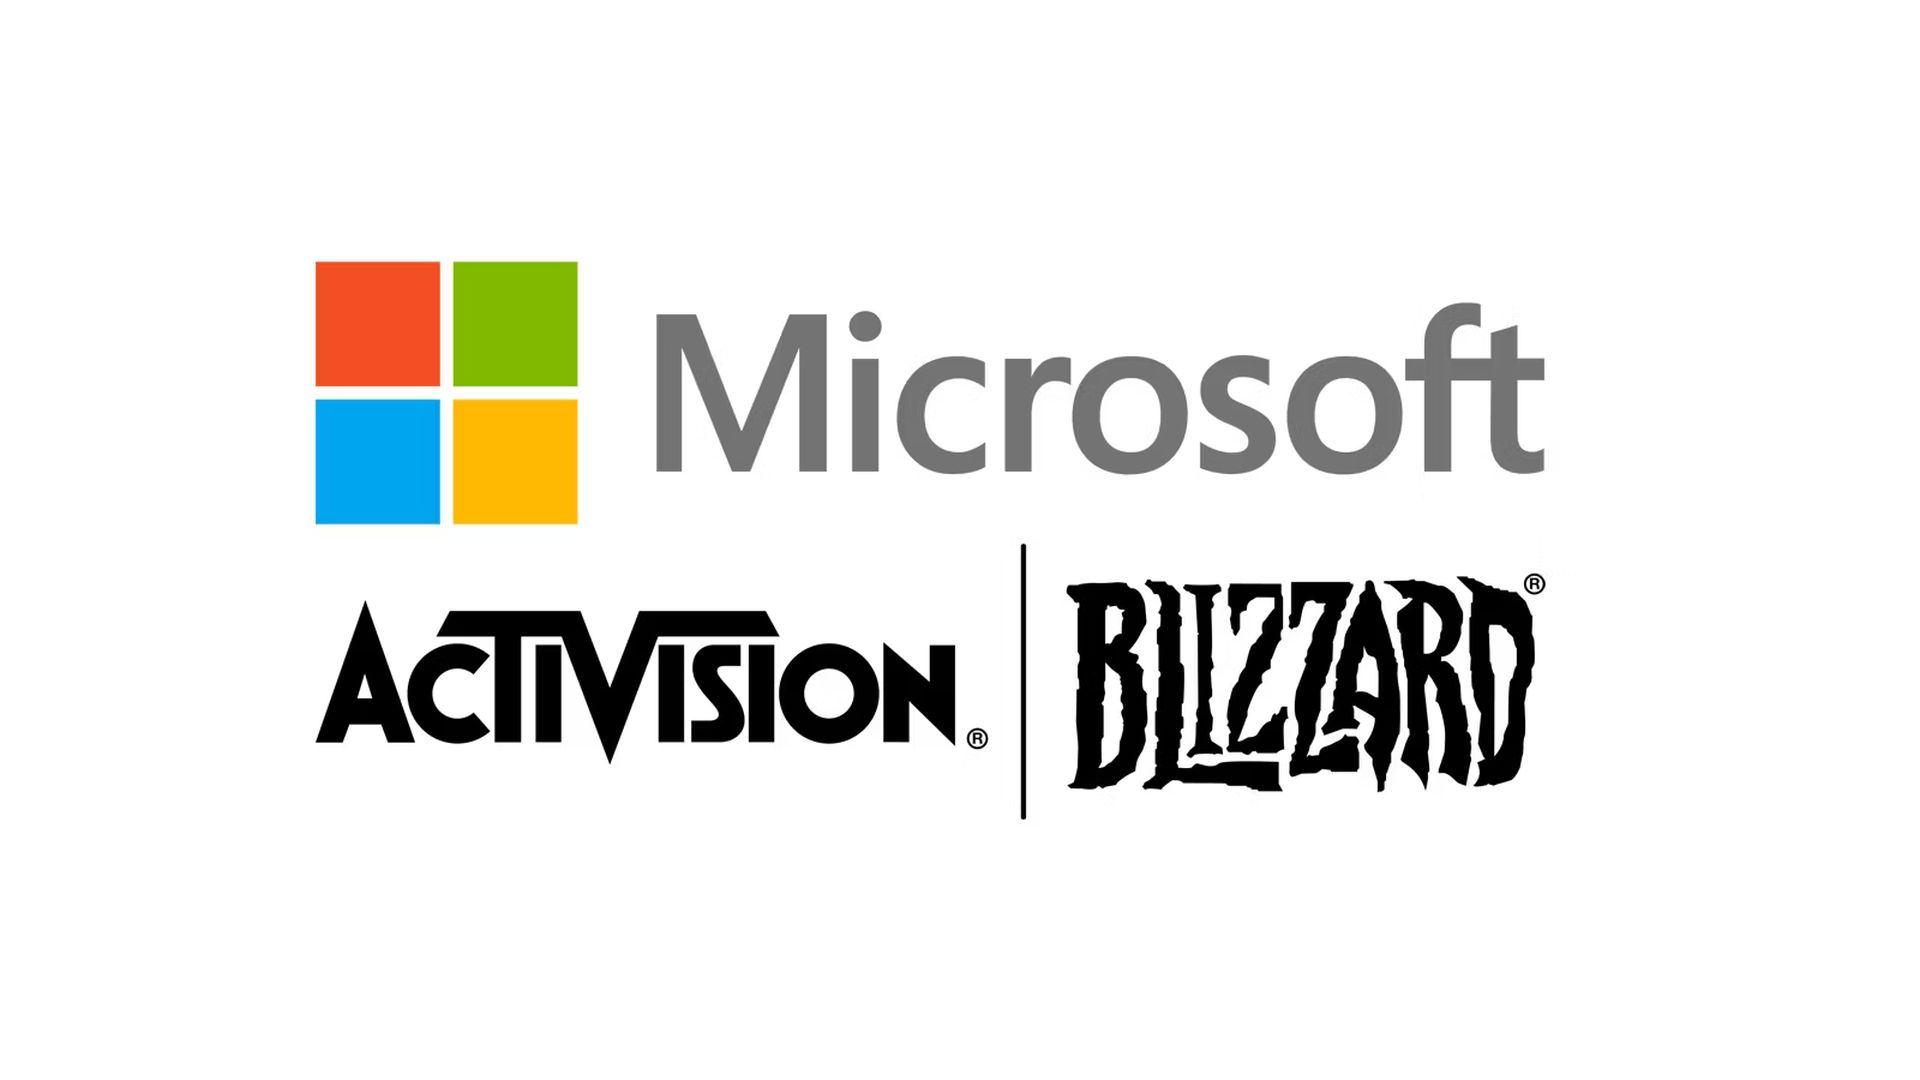 Microsoft Reports 49 Percent Growth in Gaming Revenue After Activision Blizzard Acquisition